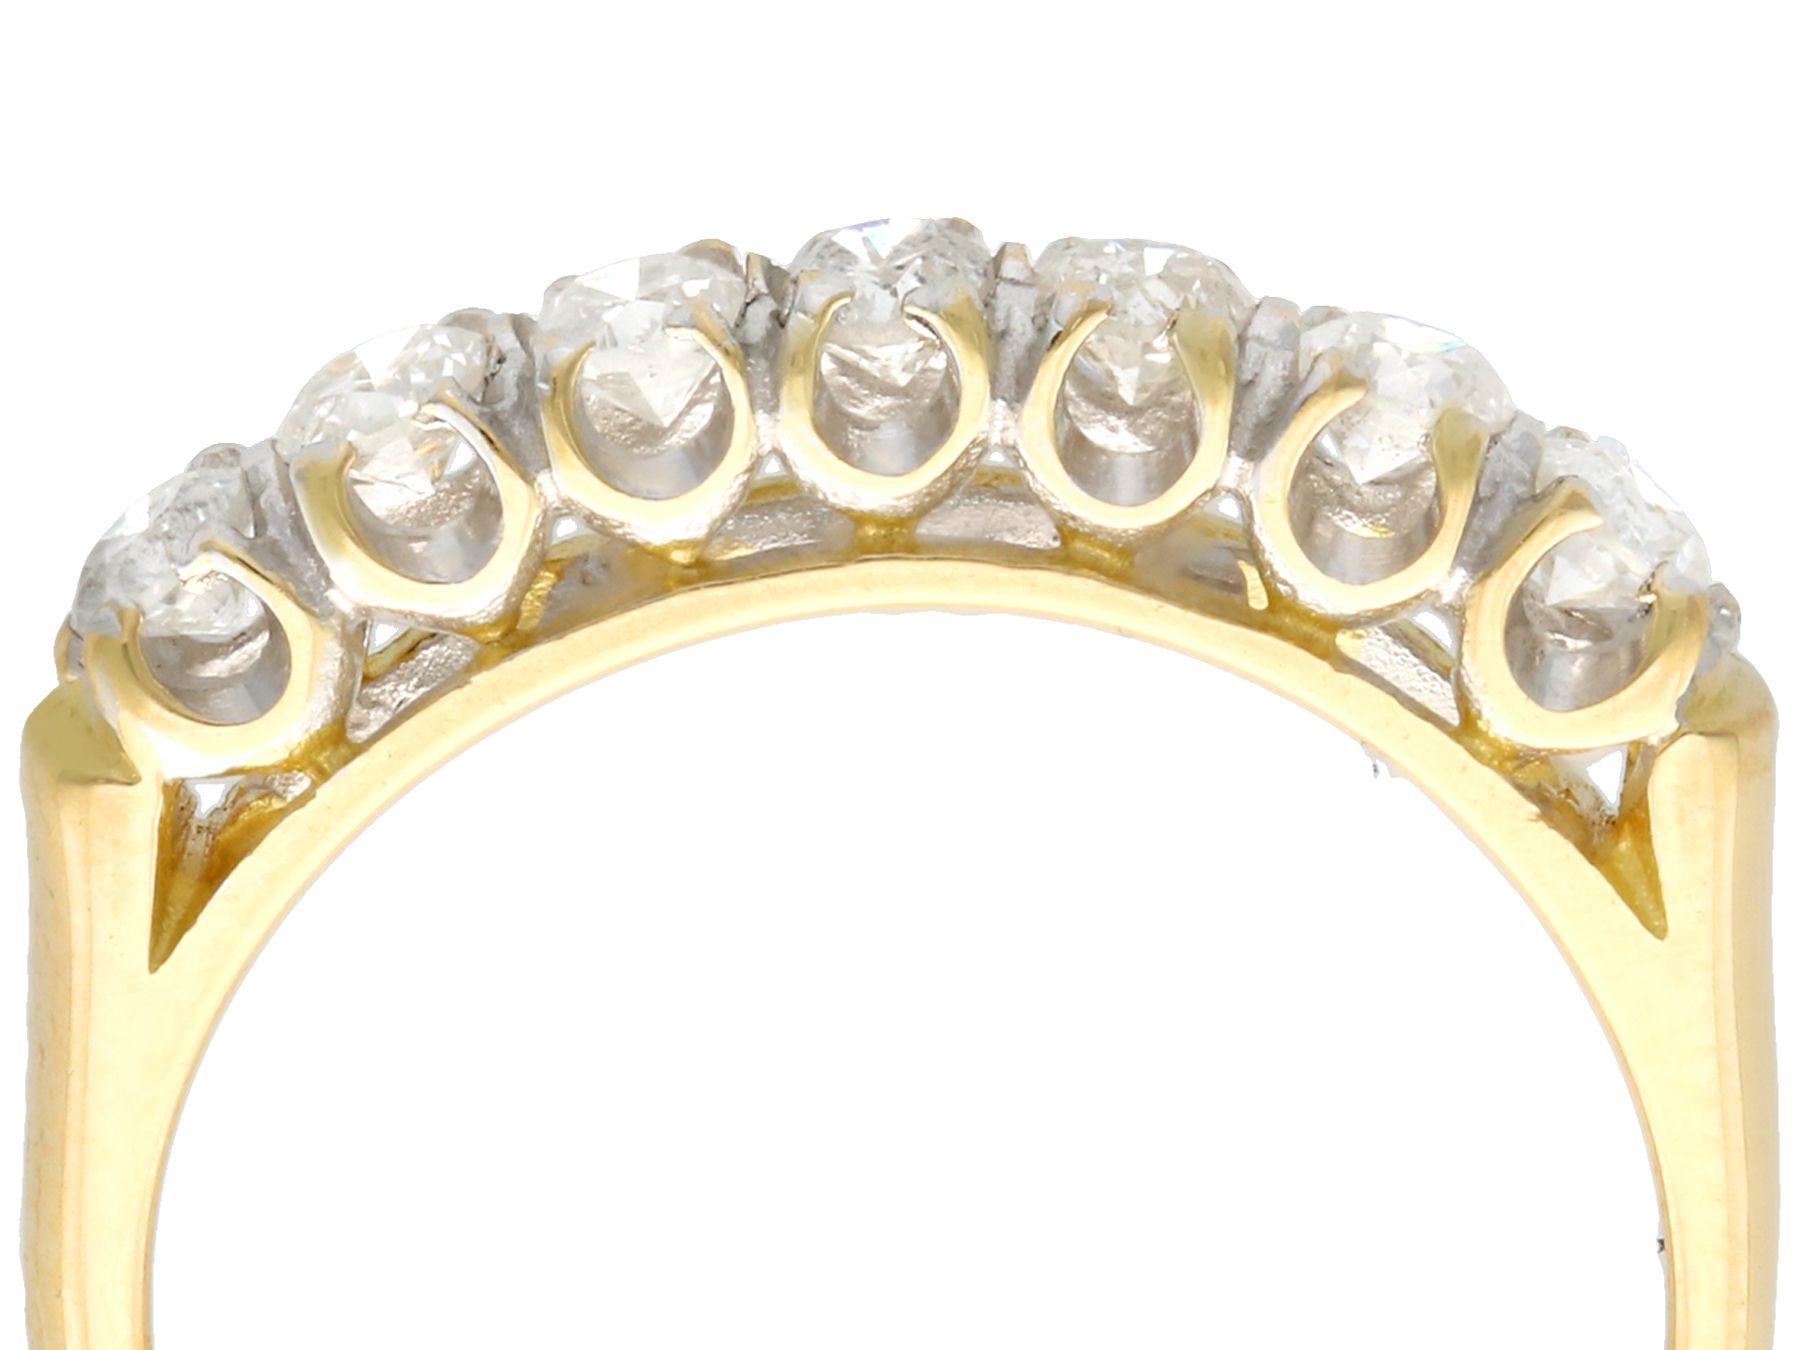 An impressive contemporary 0.56 carat diamond and 18k yellow gold, 18k white gold set half eternity ring; part of our diverse diamond jewelry collections.

This fine and impressive seven diamond half eternity ring has been crafted in 18k yellow gold